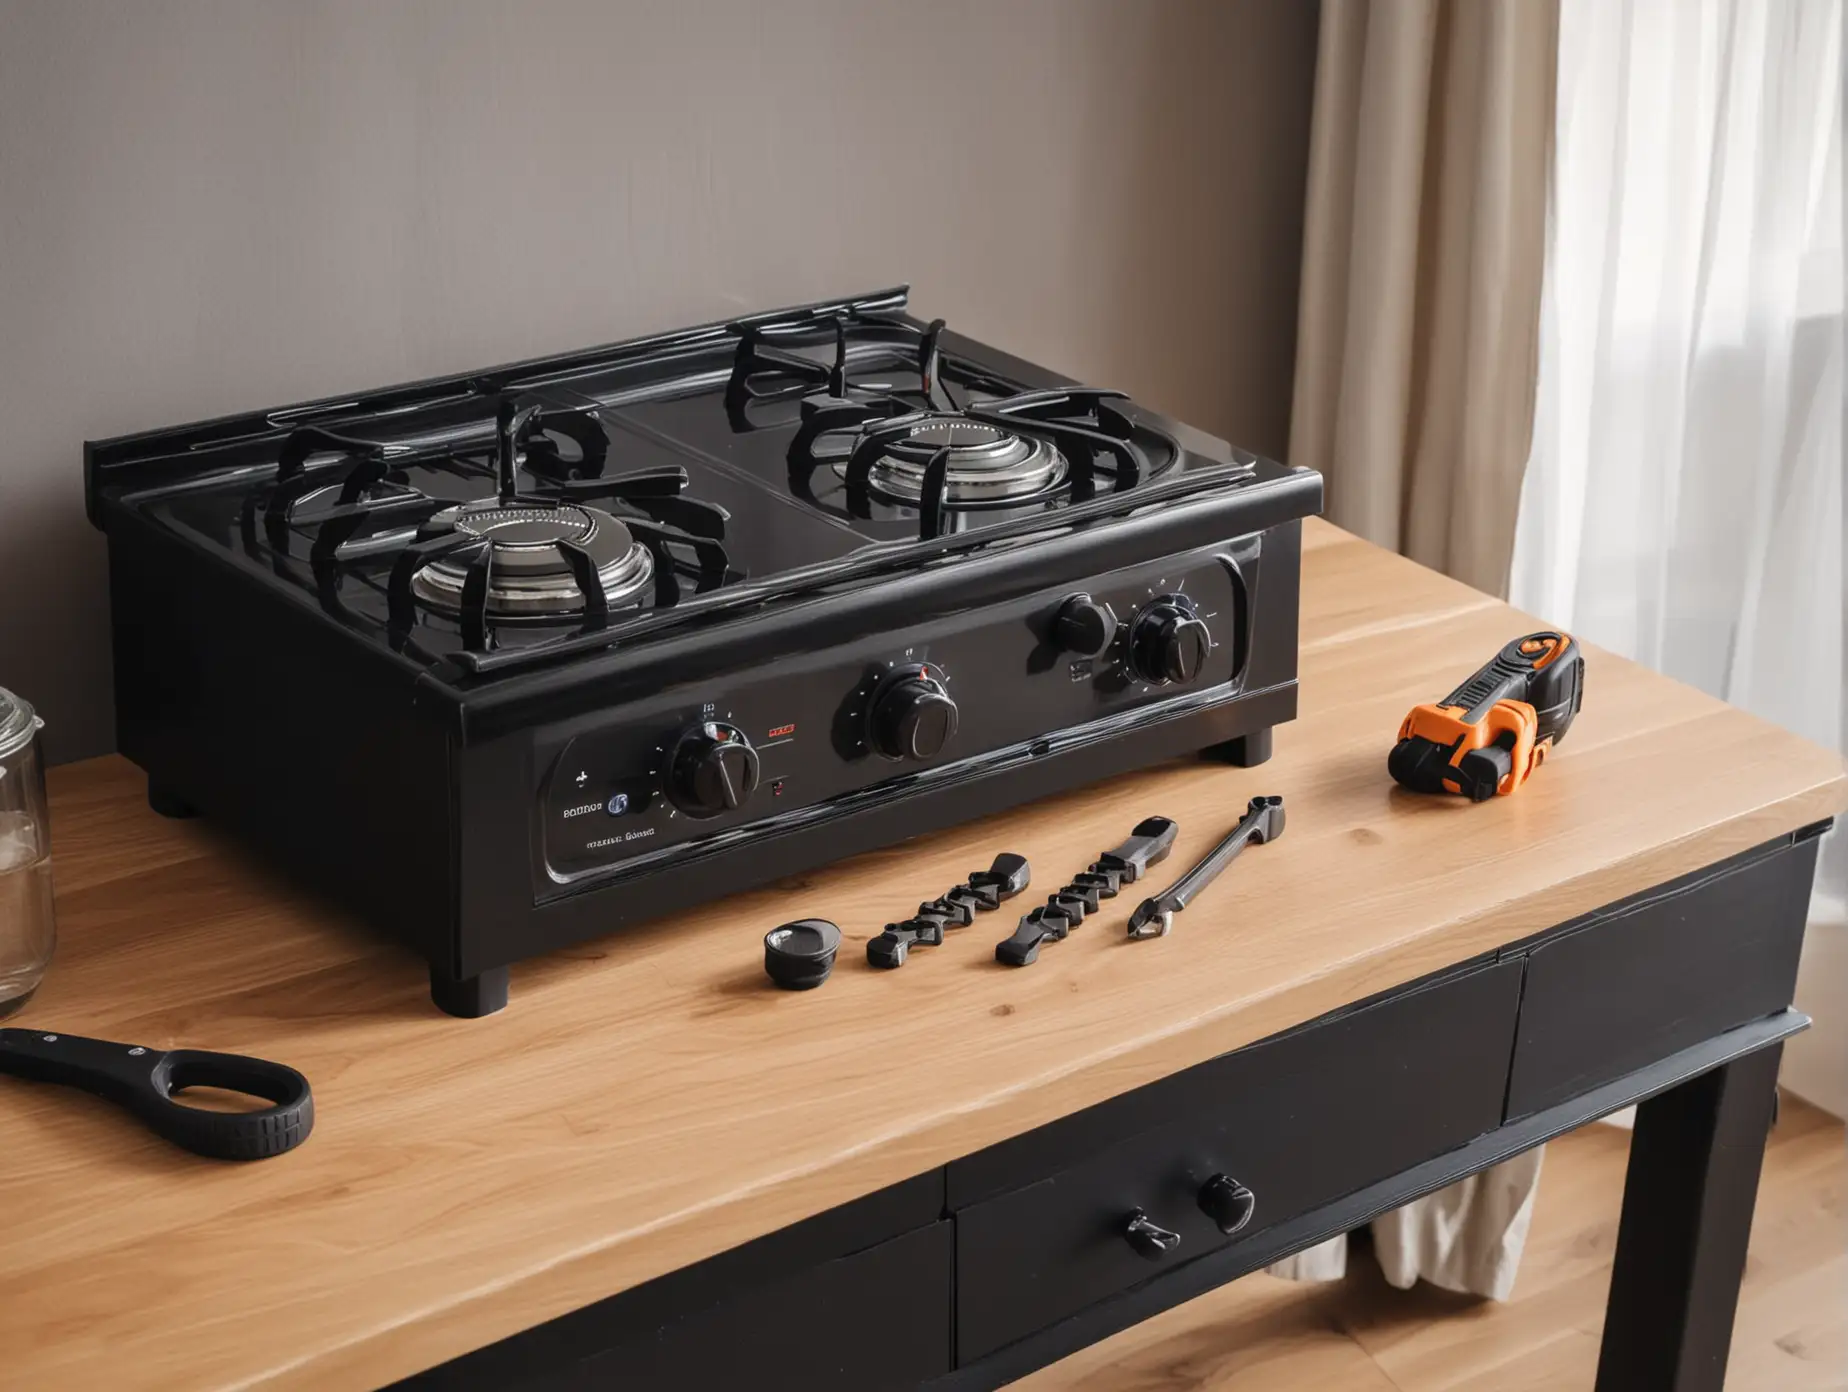 Luxurious-Home-Mechanics-Black-Electric-Stove-and-Essential-Tools-on-Table